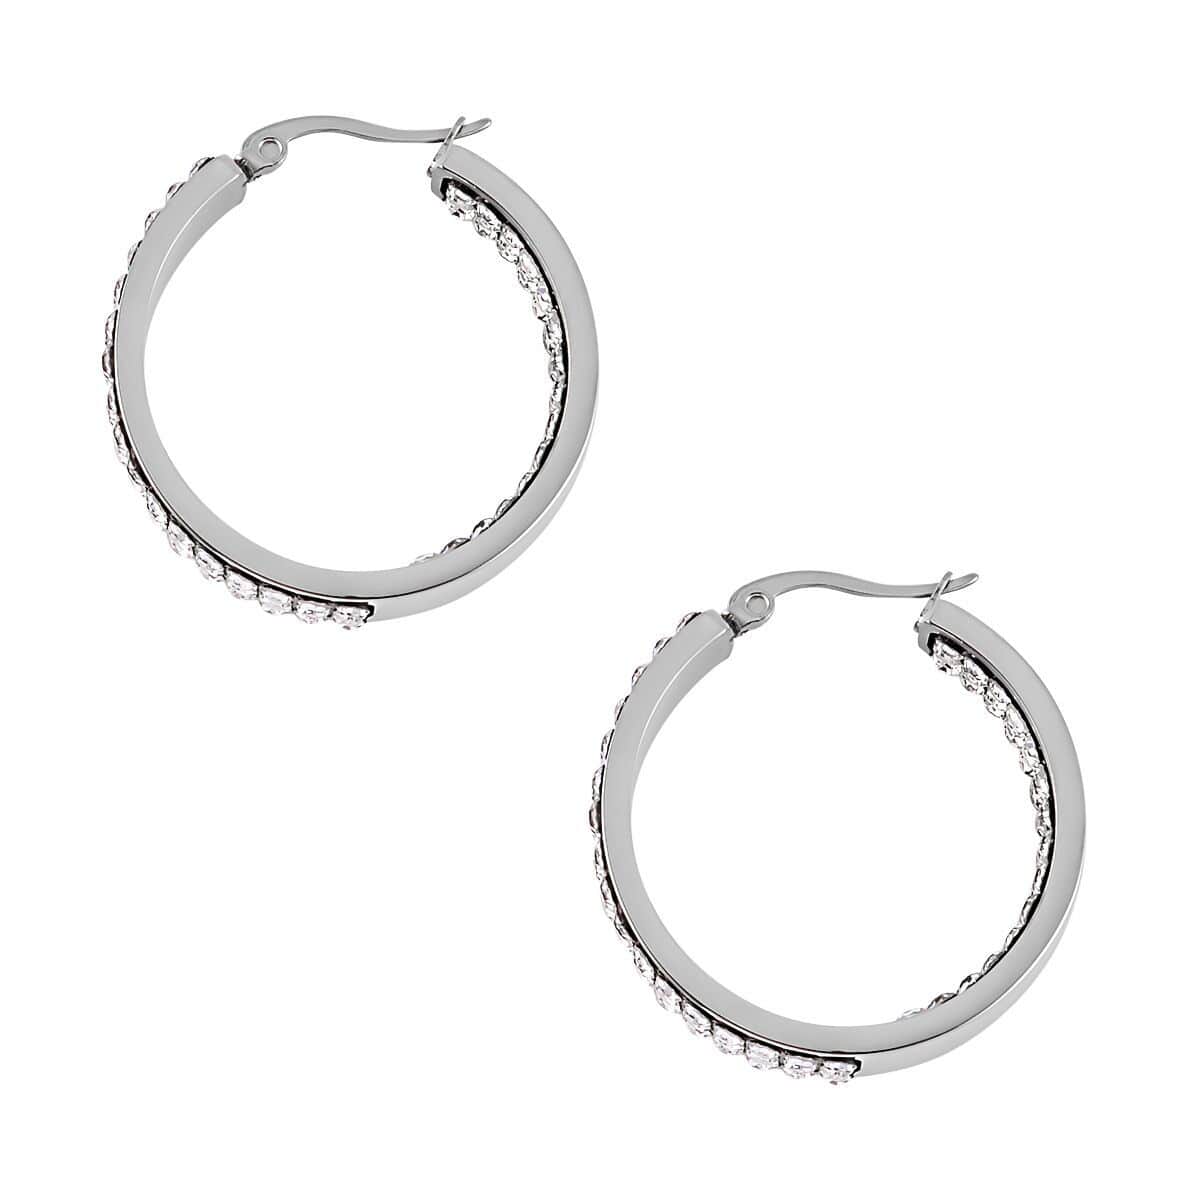 Set of 4 pairs Simulated Diamod, Austrian Crystal Hoops and Stud Earrings in Stainless Steel image number 4